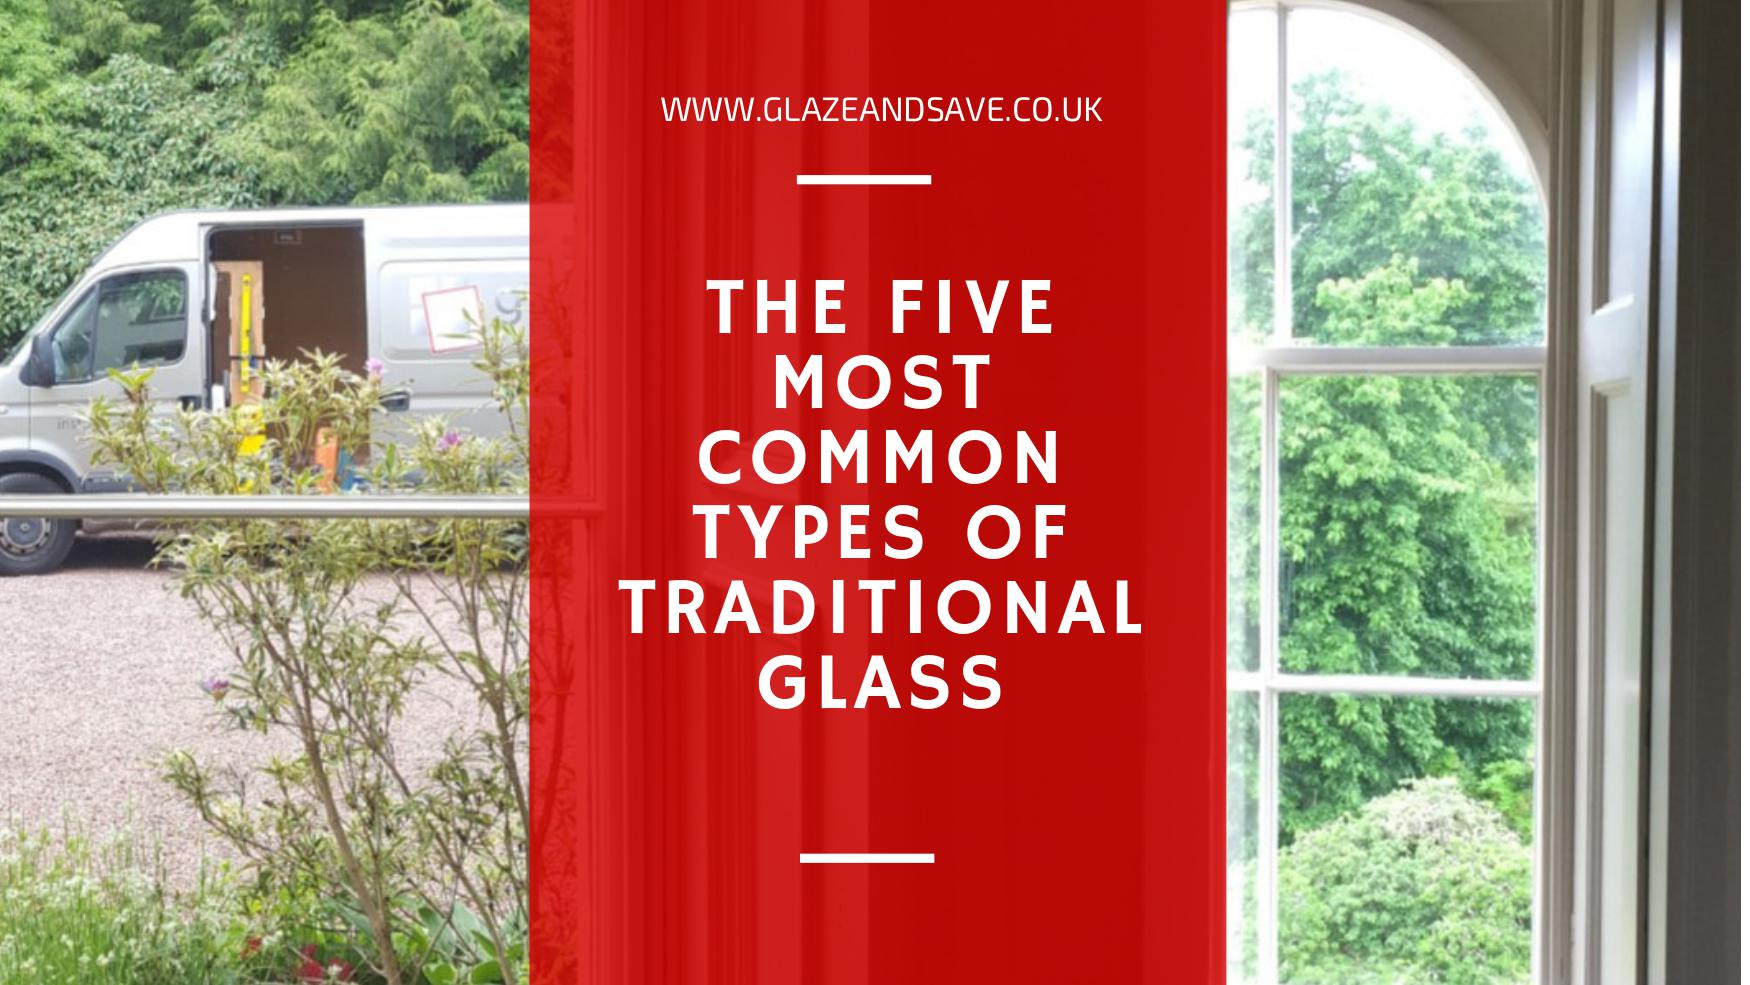 The five most common types of traditional glass by Glaze & Save bespoke magnetic secondary glazing and draught proofing specialists based in Perth and serving the whole of Scotland.